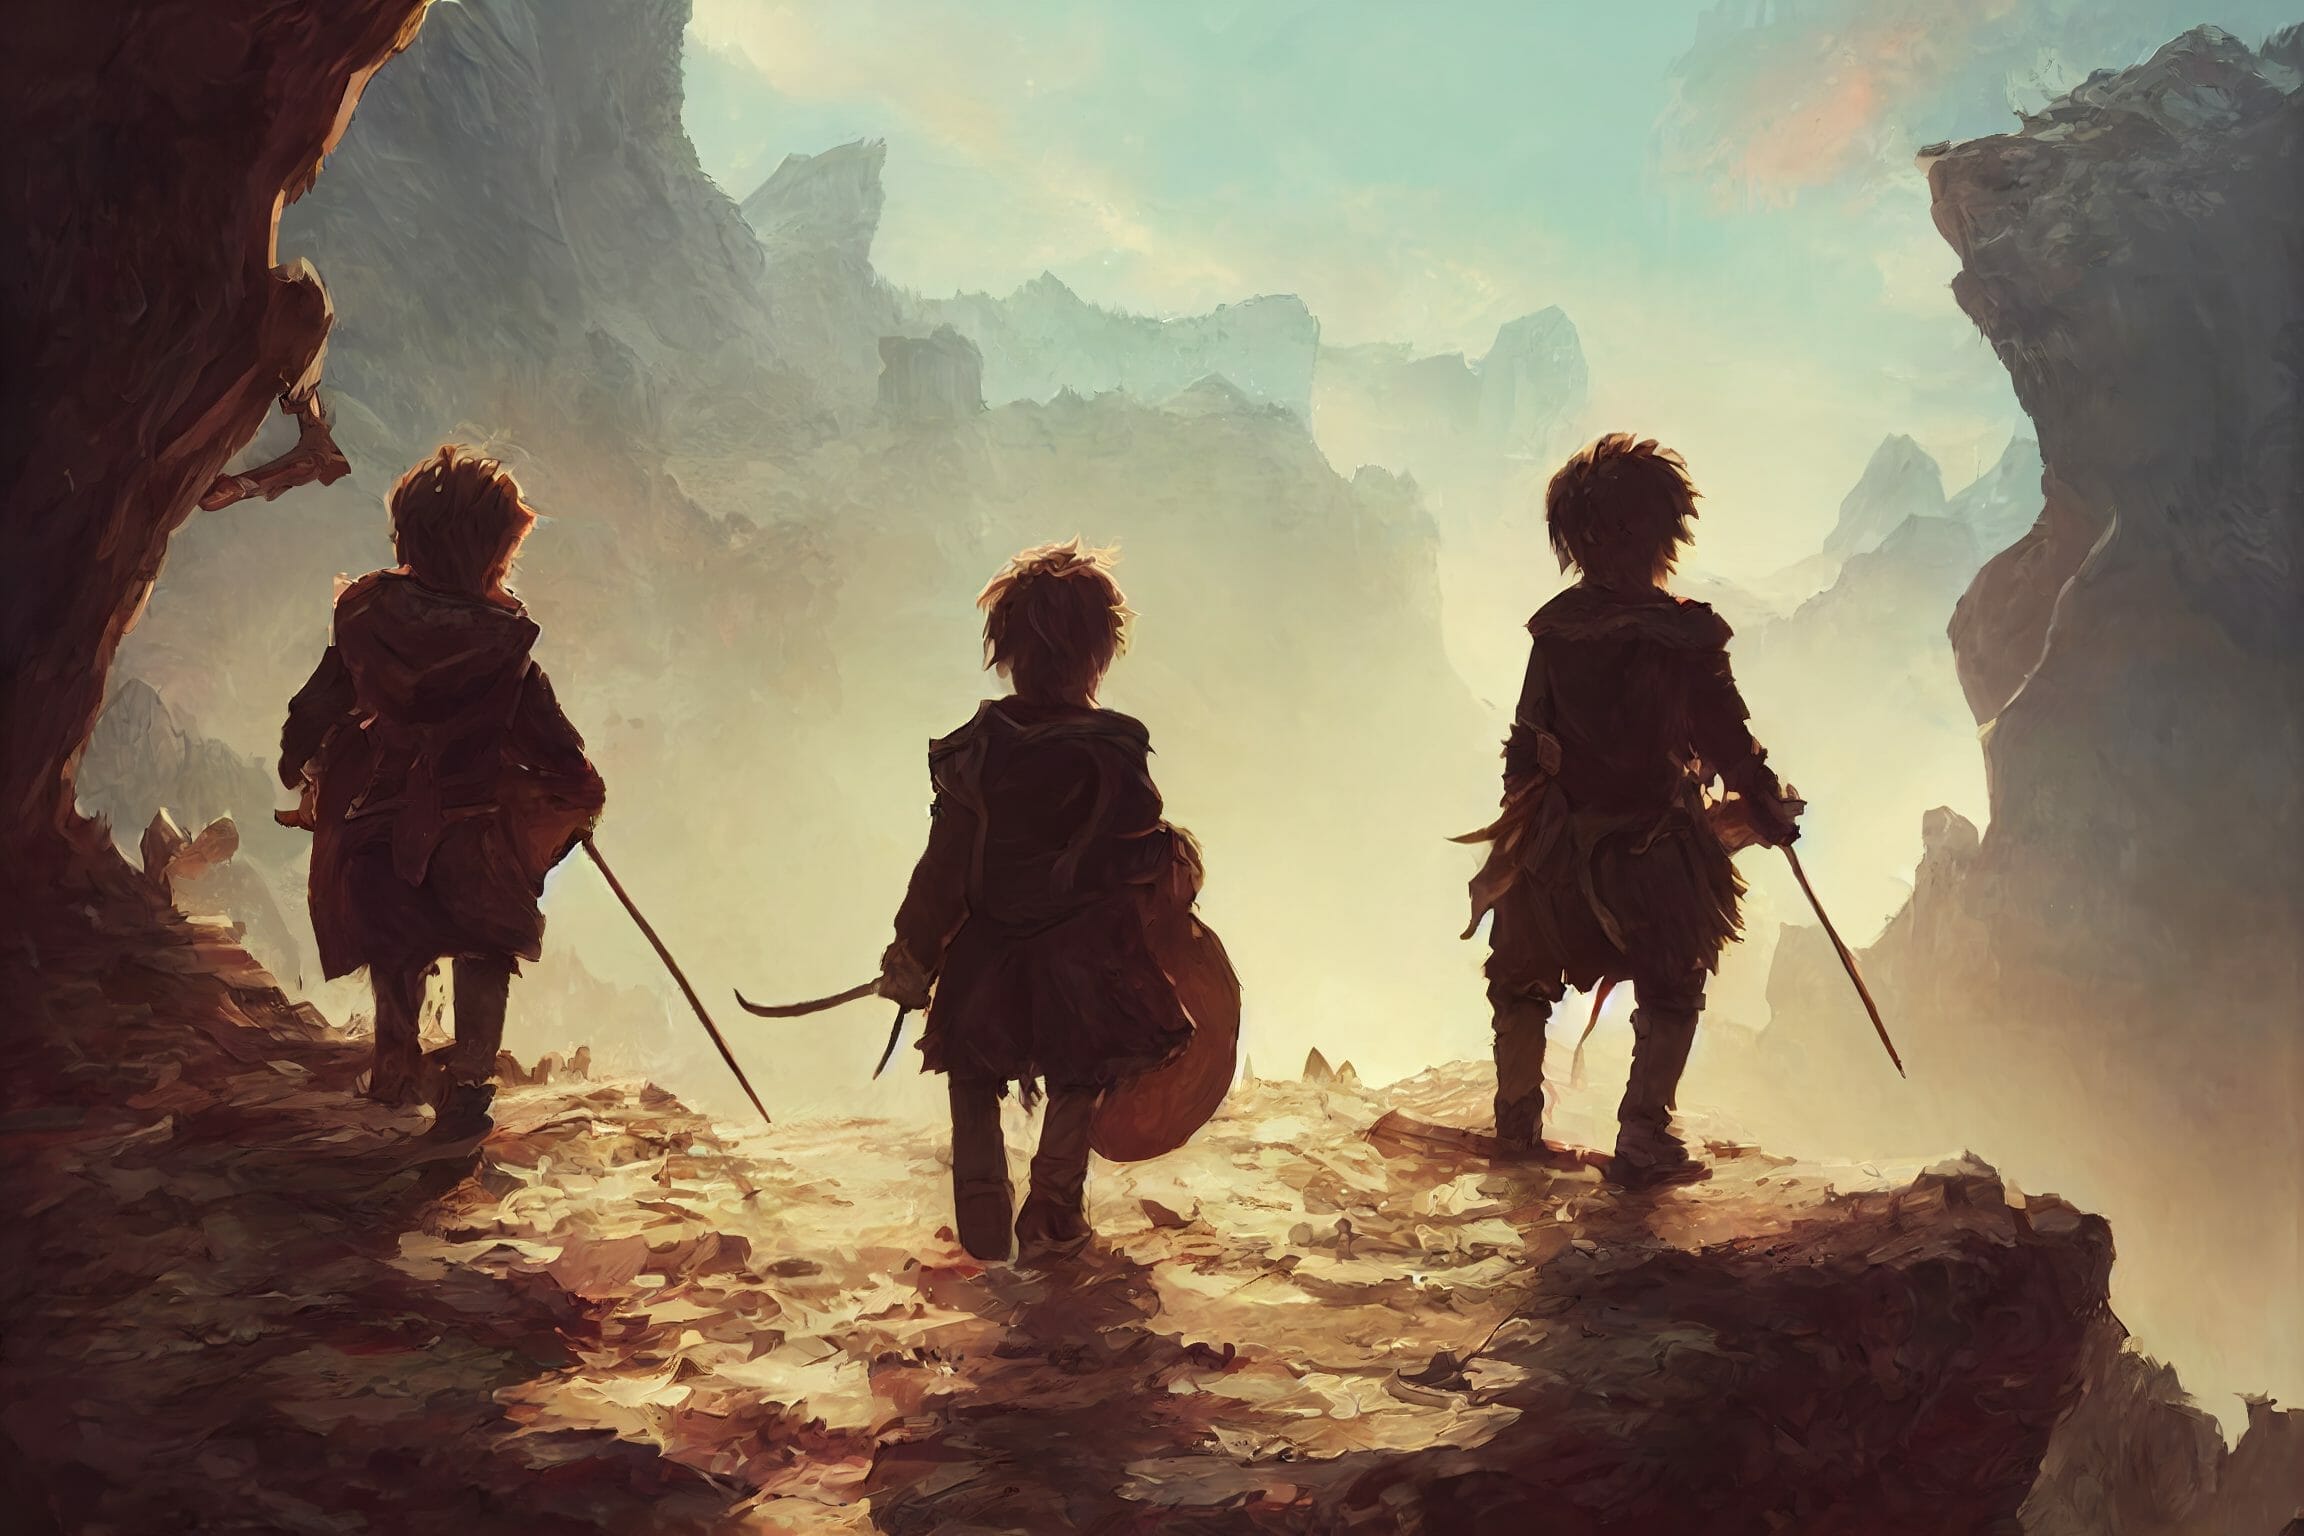 Three young adventurers stand on a cliff/mountain edge and look out on a valley extending ahead of them